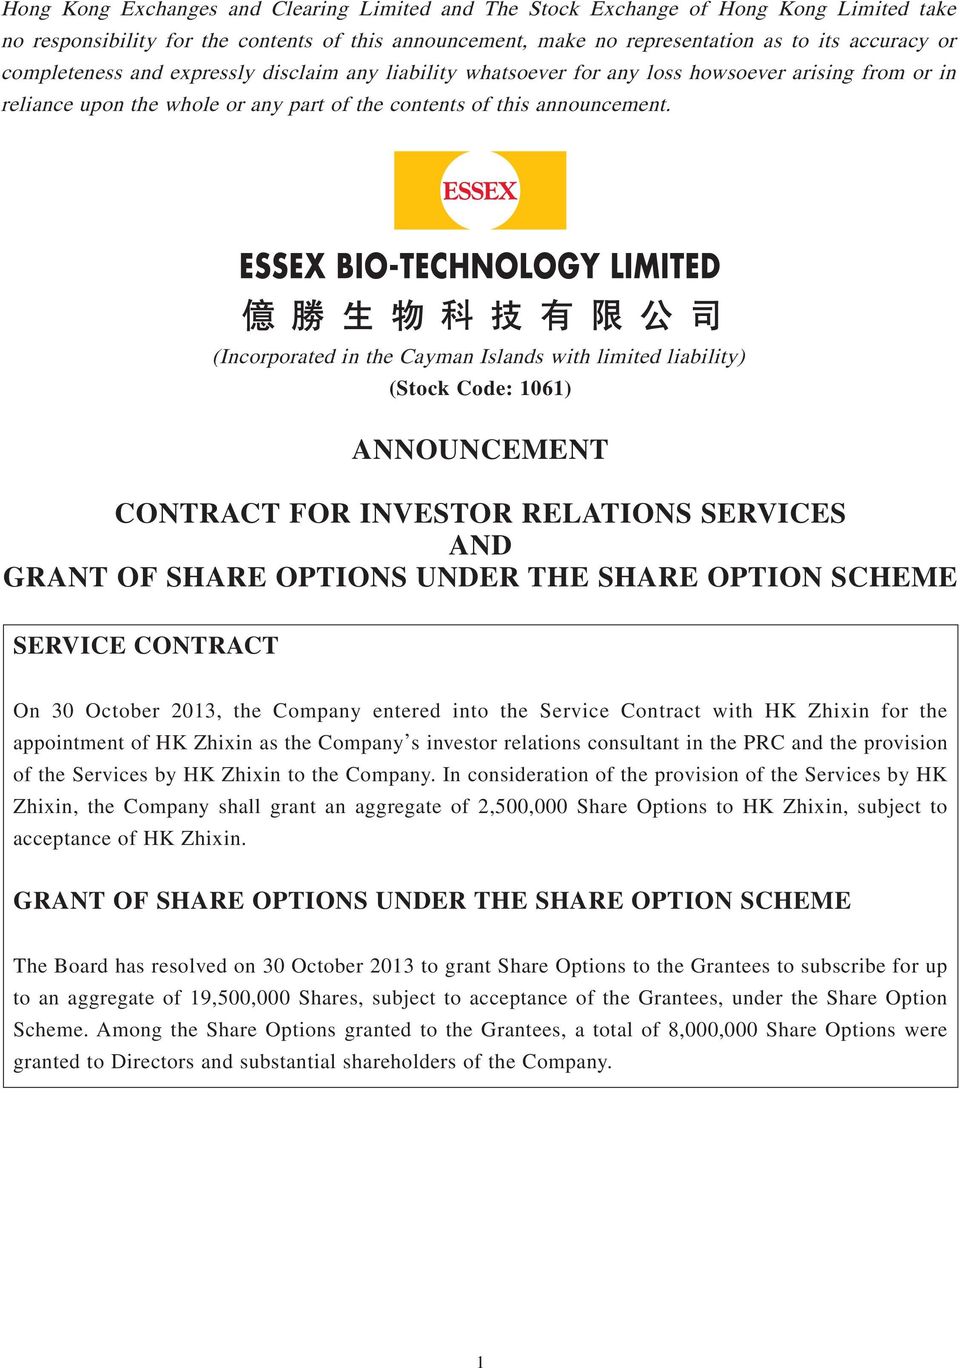 (Incorporated in the Cayman Islands with limited liability) (Stock Code: 1061) ANNOUNCEMENT CONTRACT FOR INVESTOR RELATIONS SERVICES AND GRANT OF SHARE OPTIONS UNDER THE SHARE OPTION SCHEME SERVICE